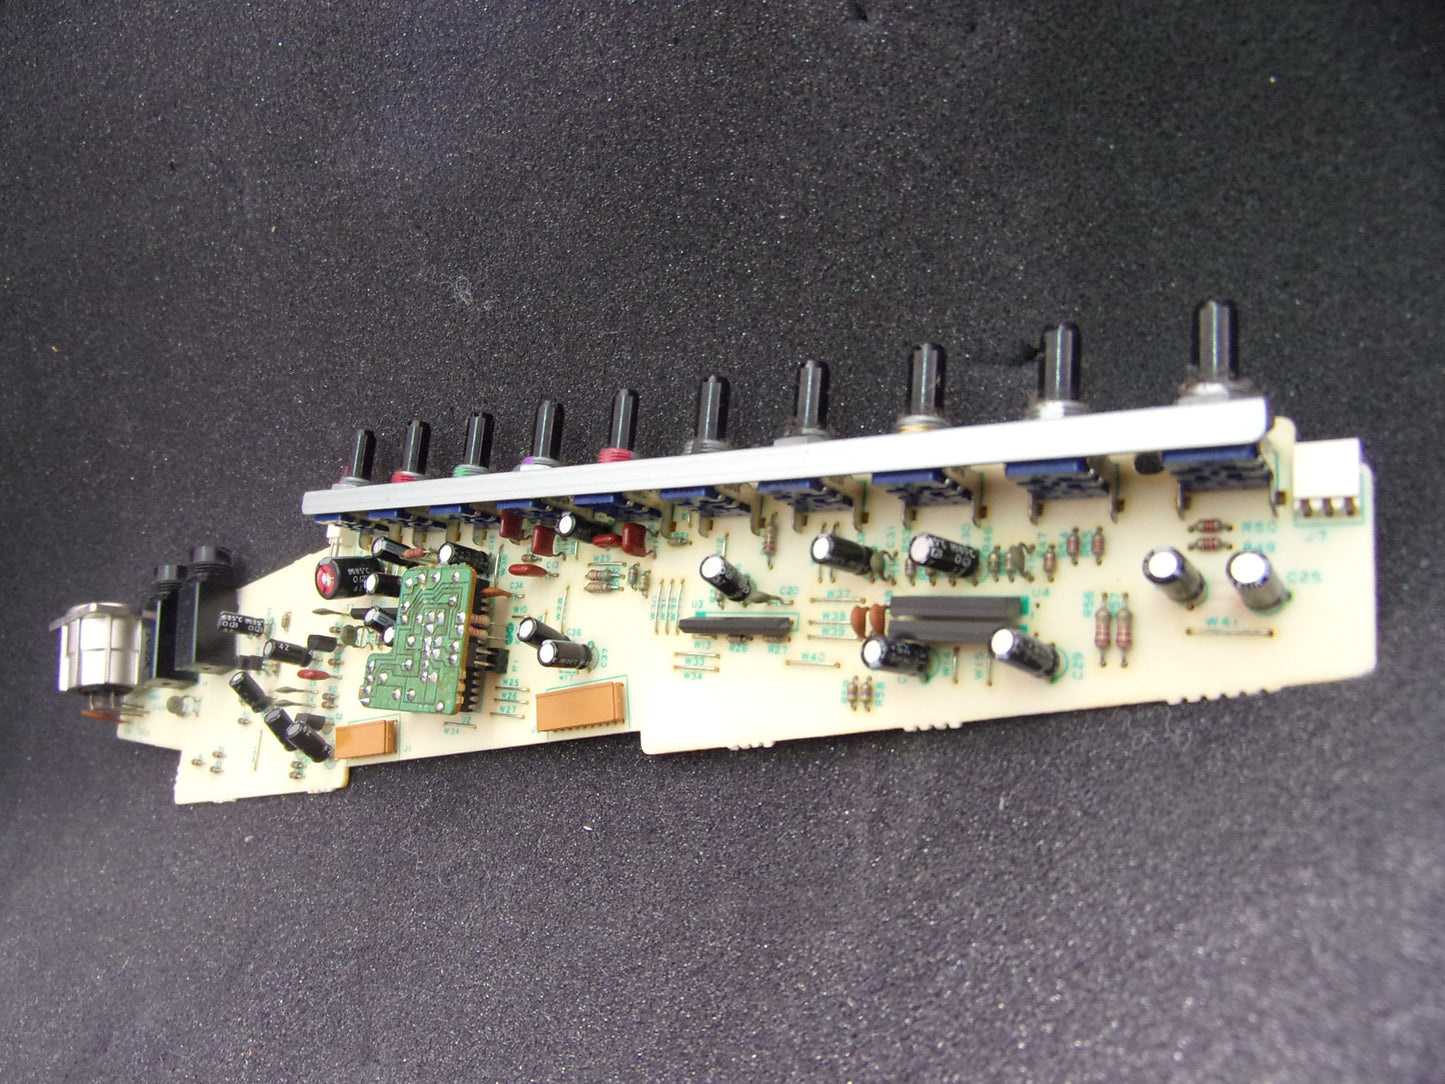 Tascam 688 input channel PCB 52102841-02 or -03